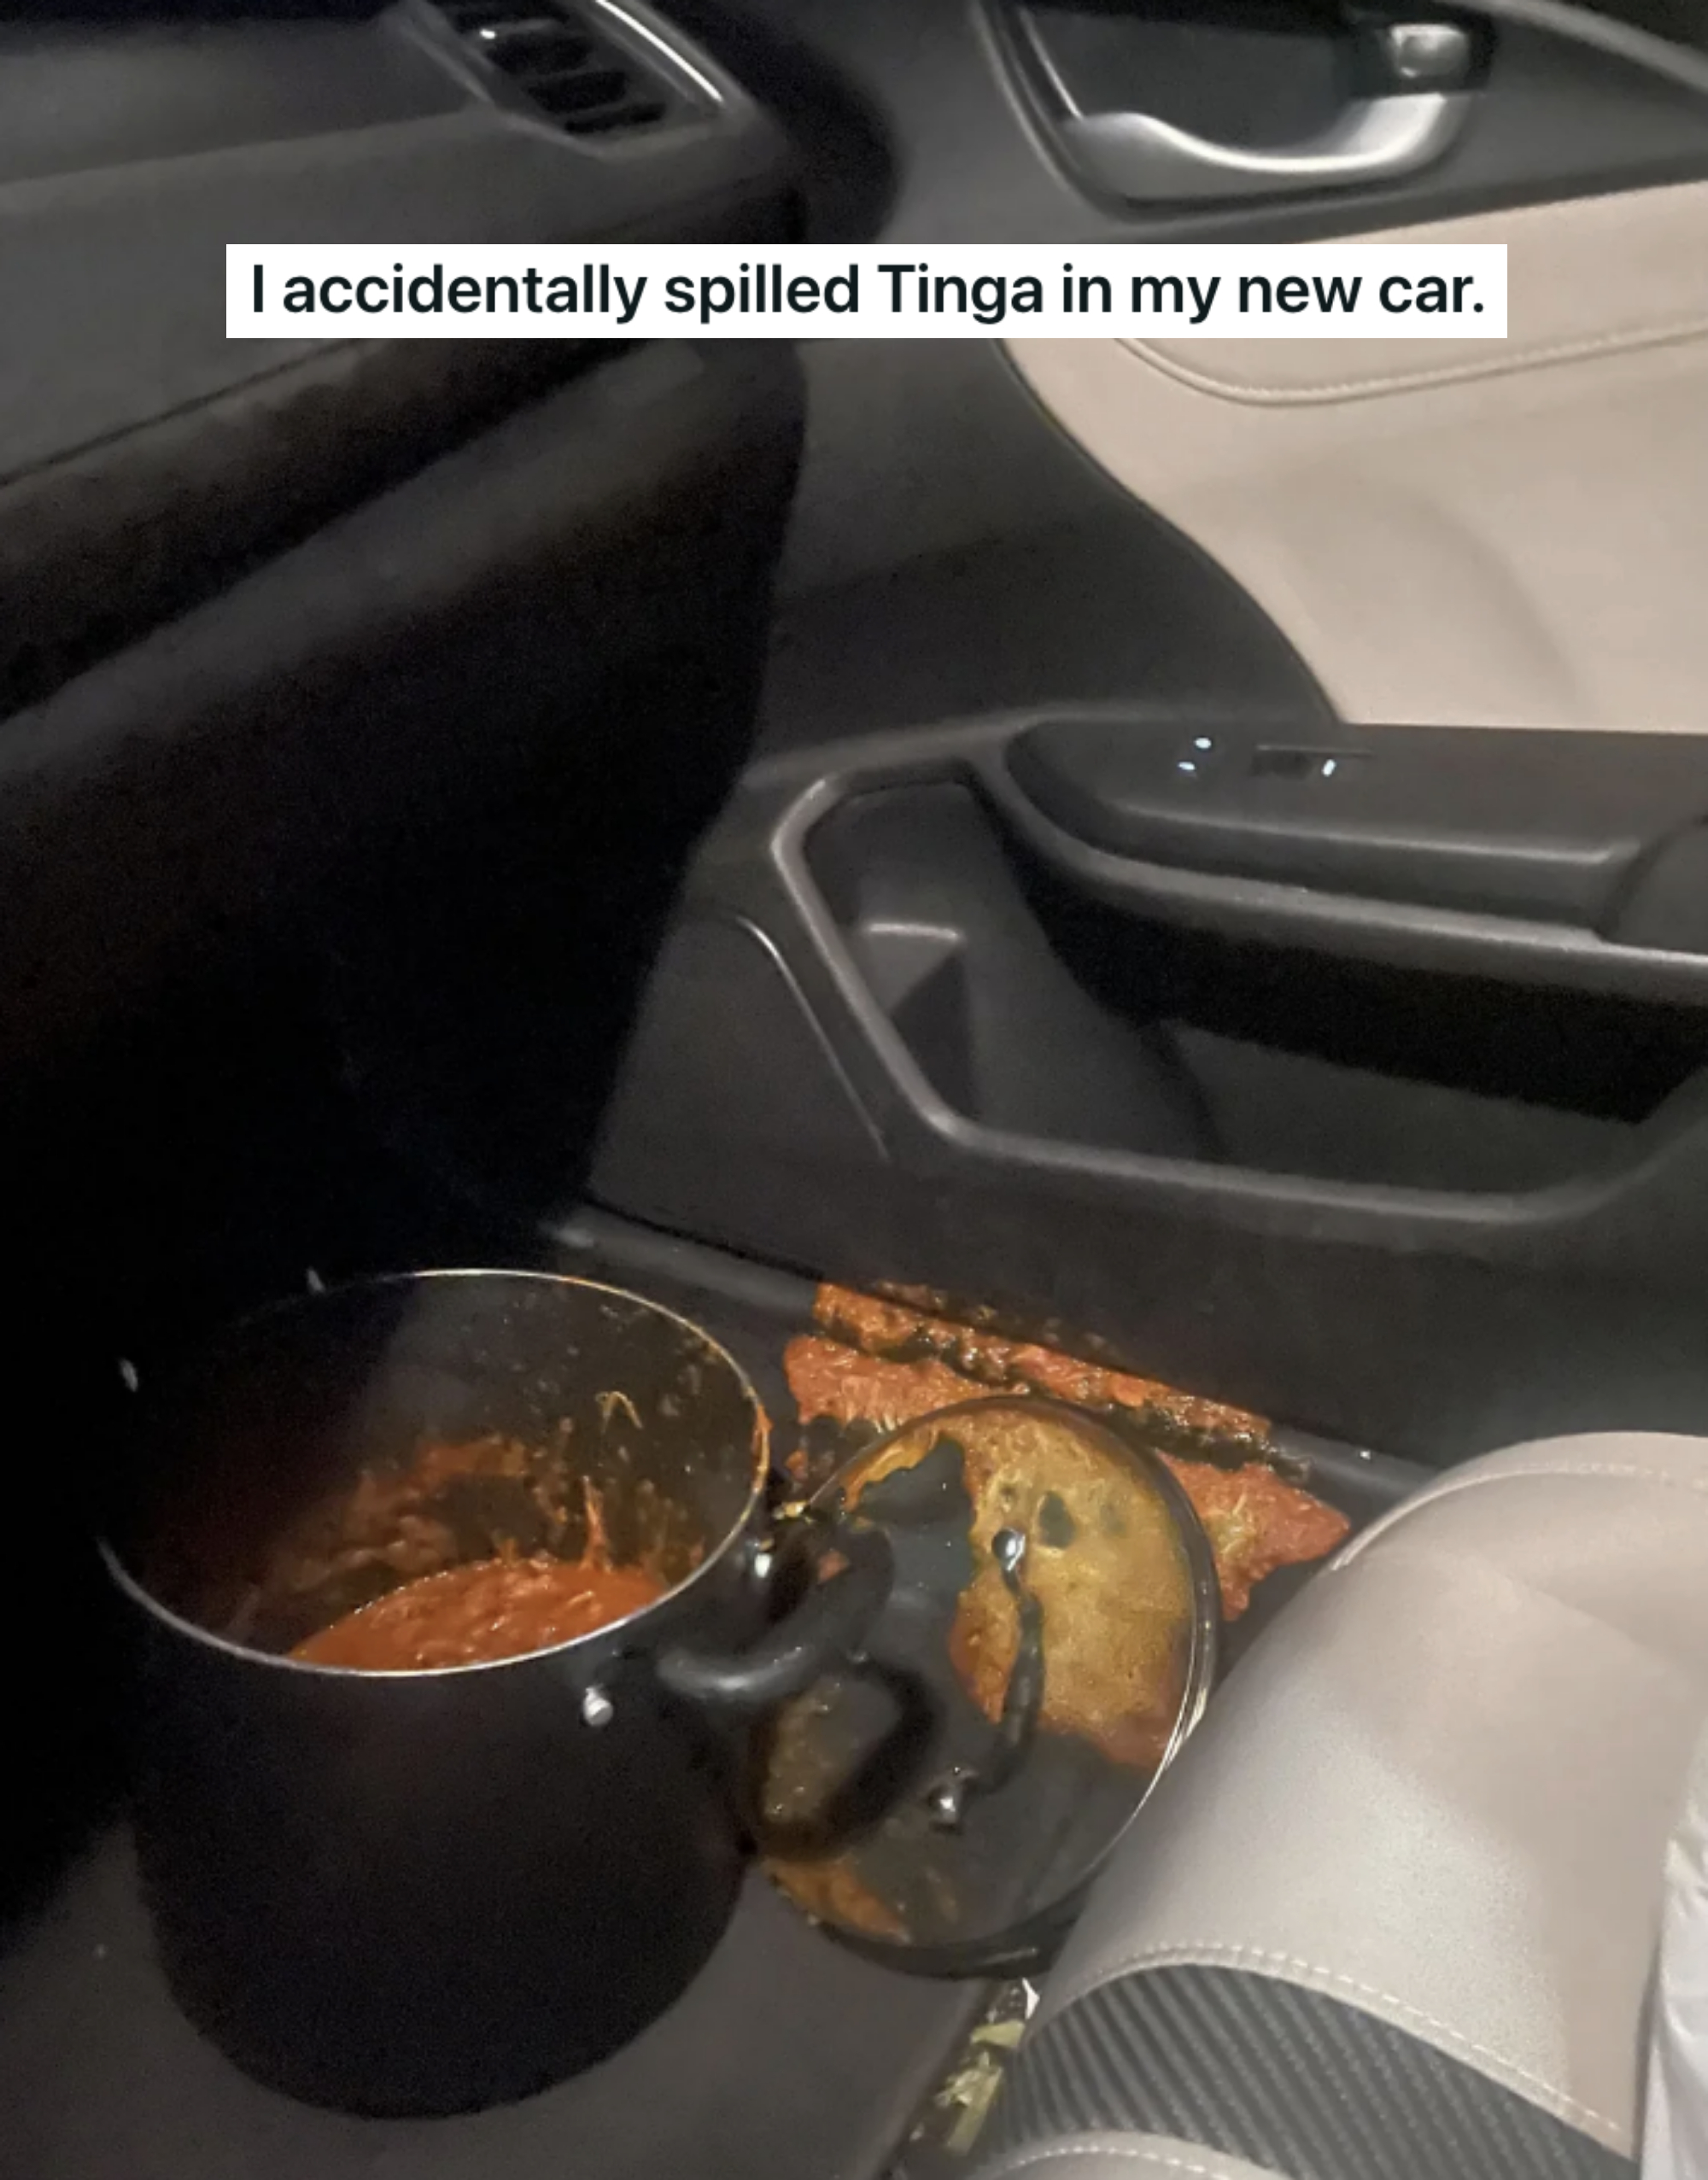 &quot;I accidentally spilled Tinga in my new car&quot;